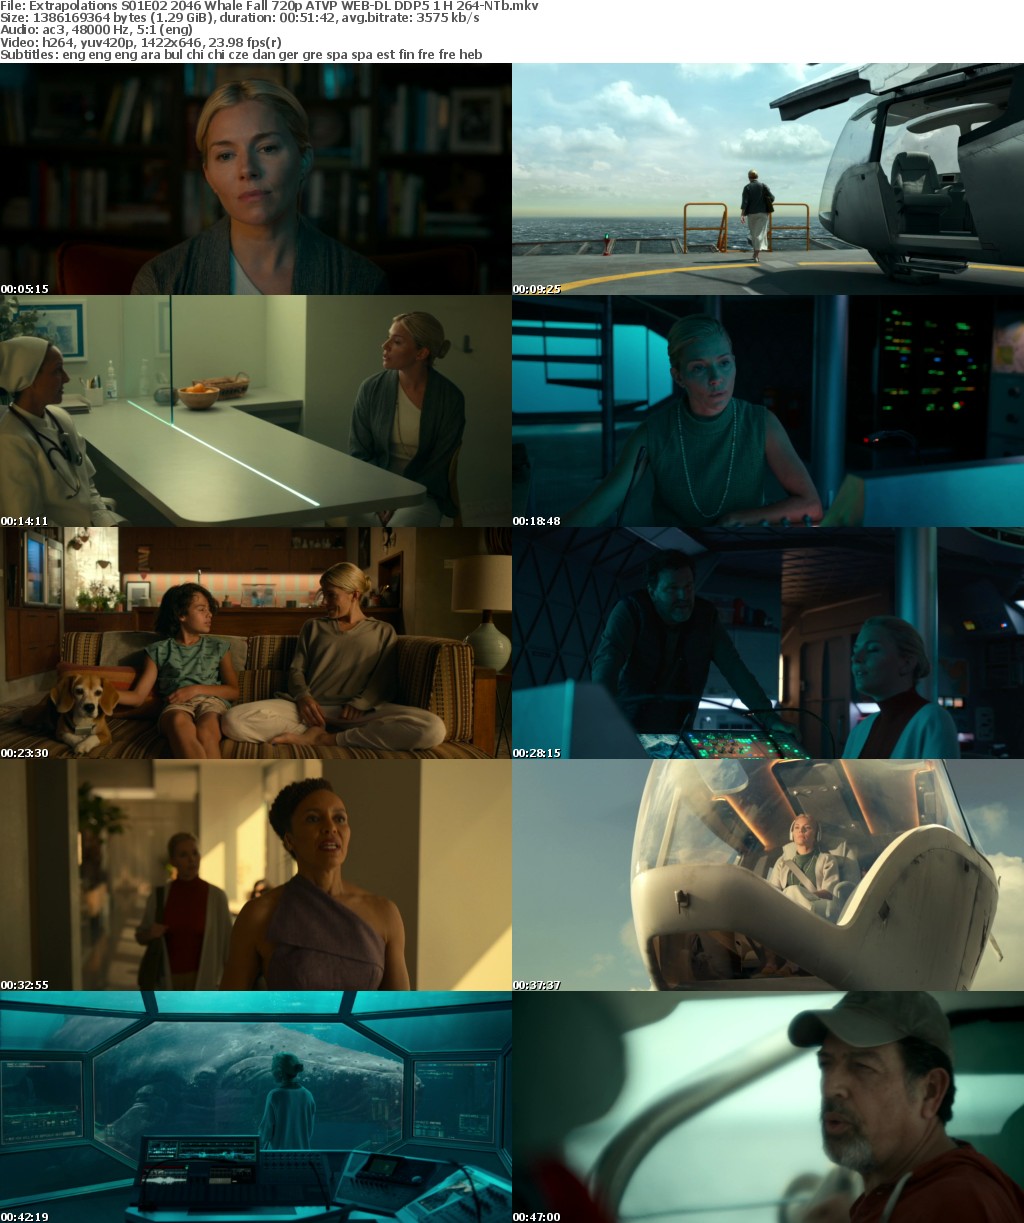 Extrapolations S01E02 2046 Whale Fall 720p ATVP WEB-DL DDP5 1 H 264-NTb